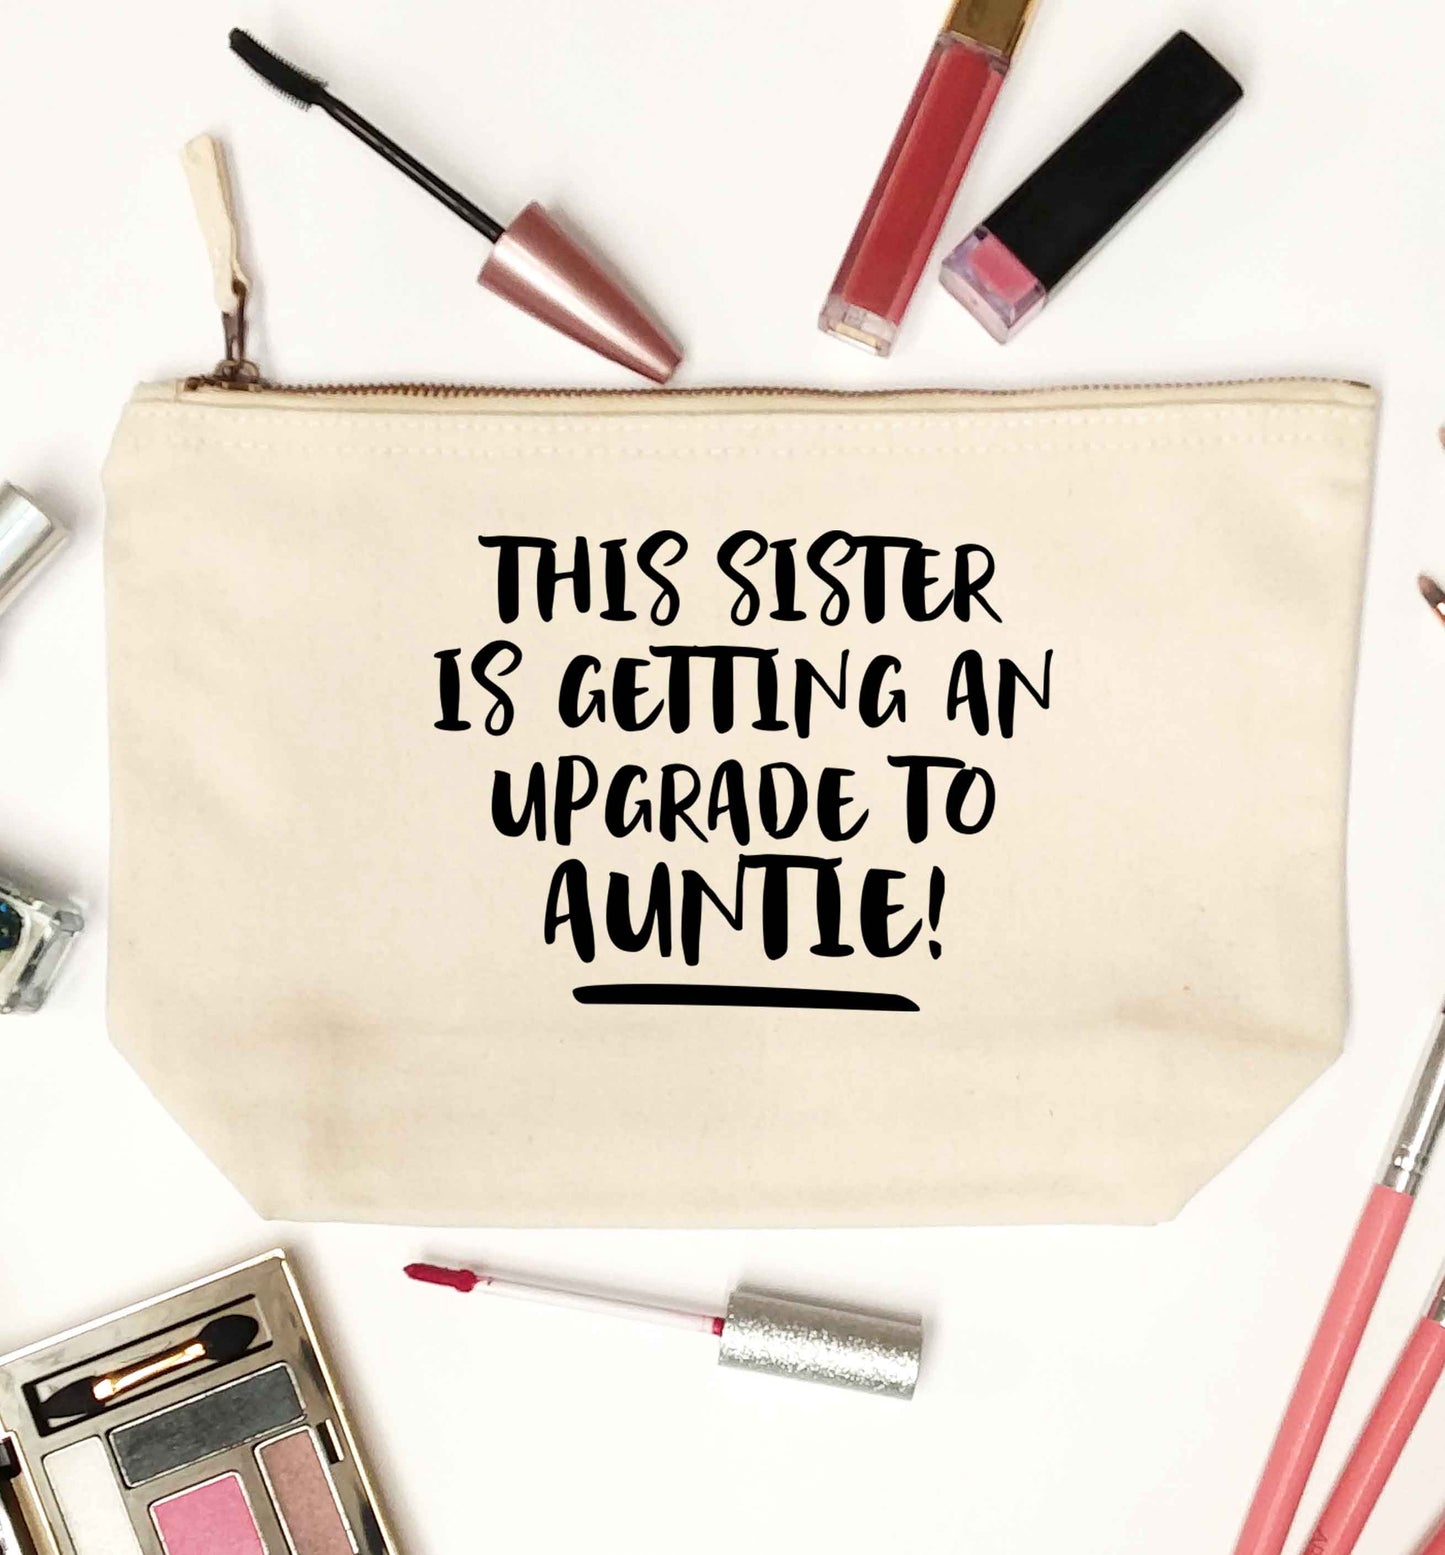 This sister is getting an upgrade to auntie! natural makeup bag